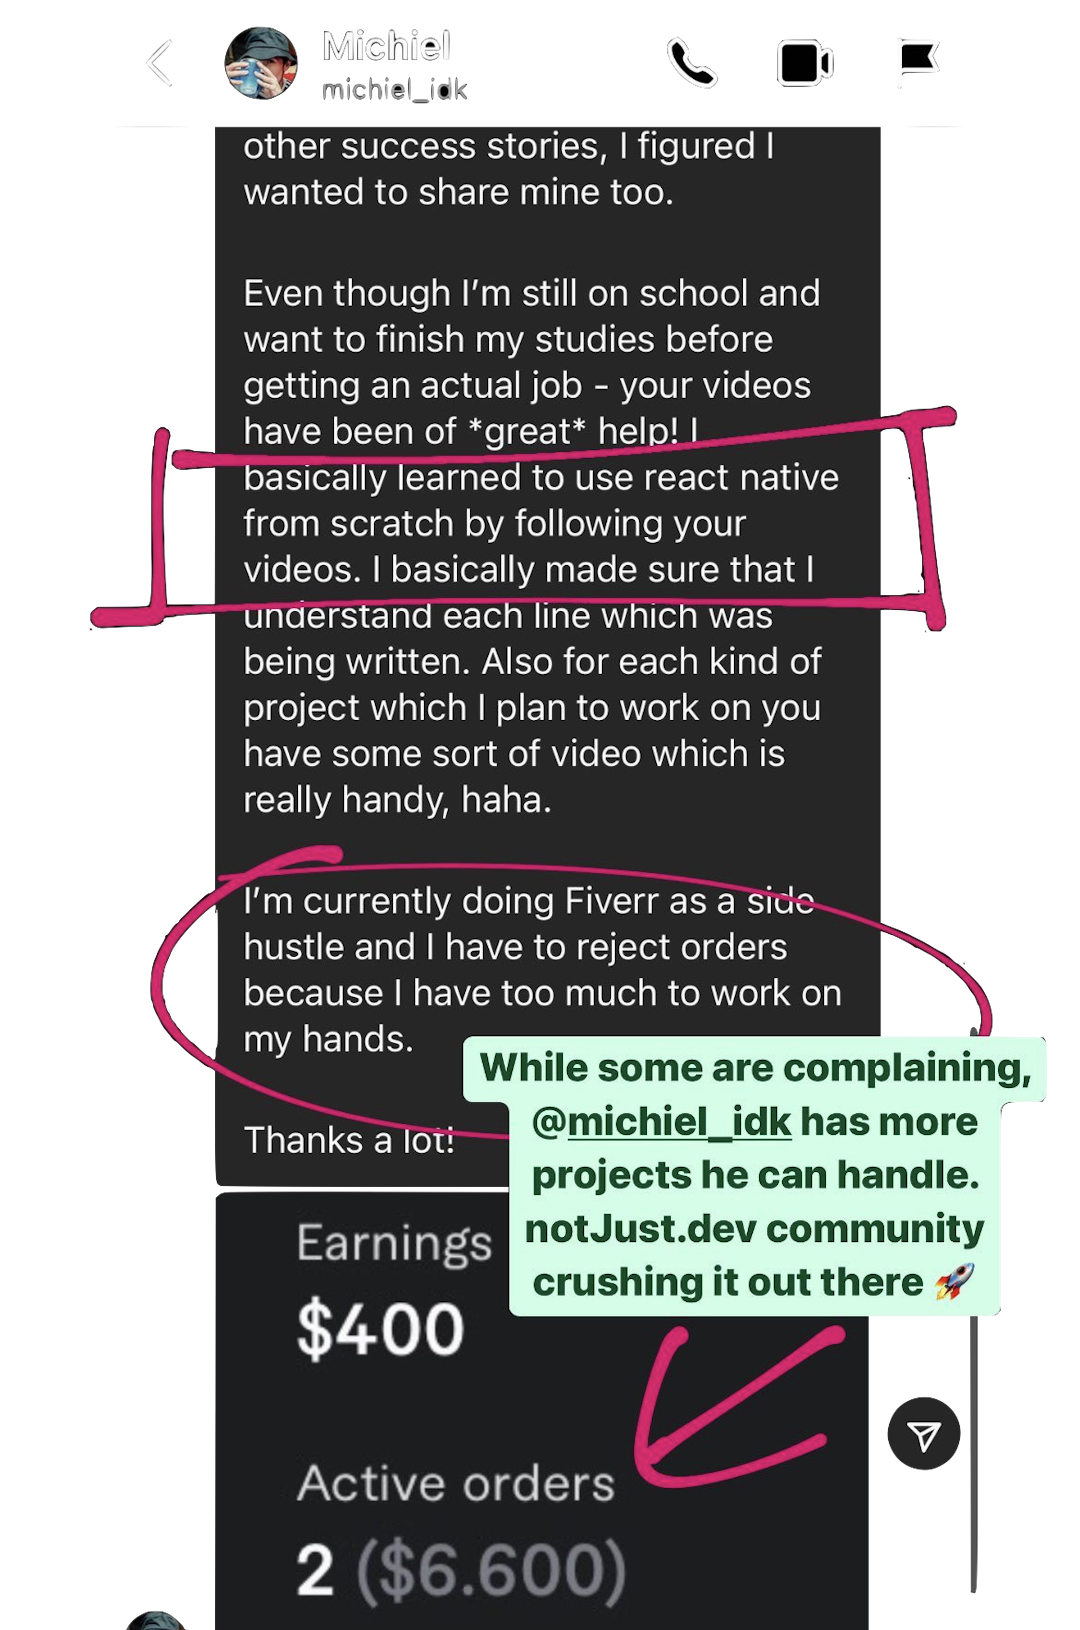 Learned to use react native from scratch by following your videos. I am currently doing Fiverr as a side hustle and I have to reject orders because I have too much work on my hands